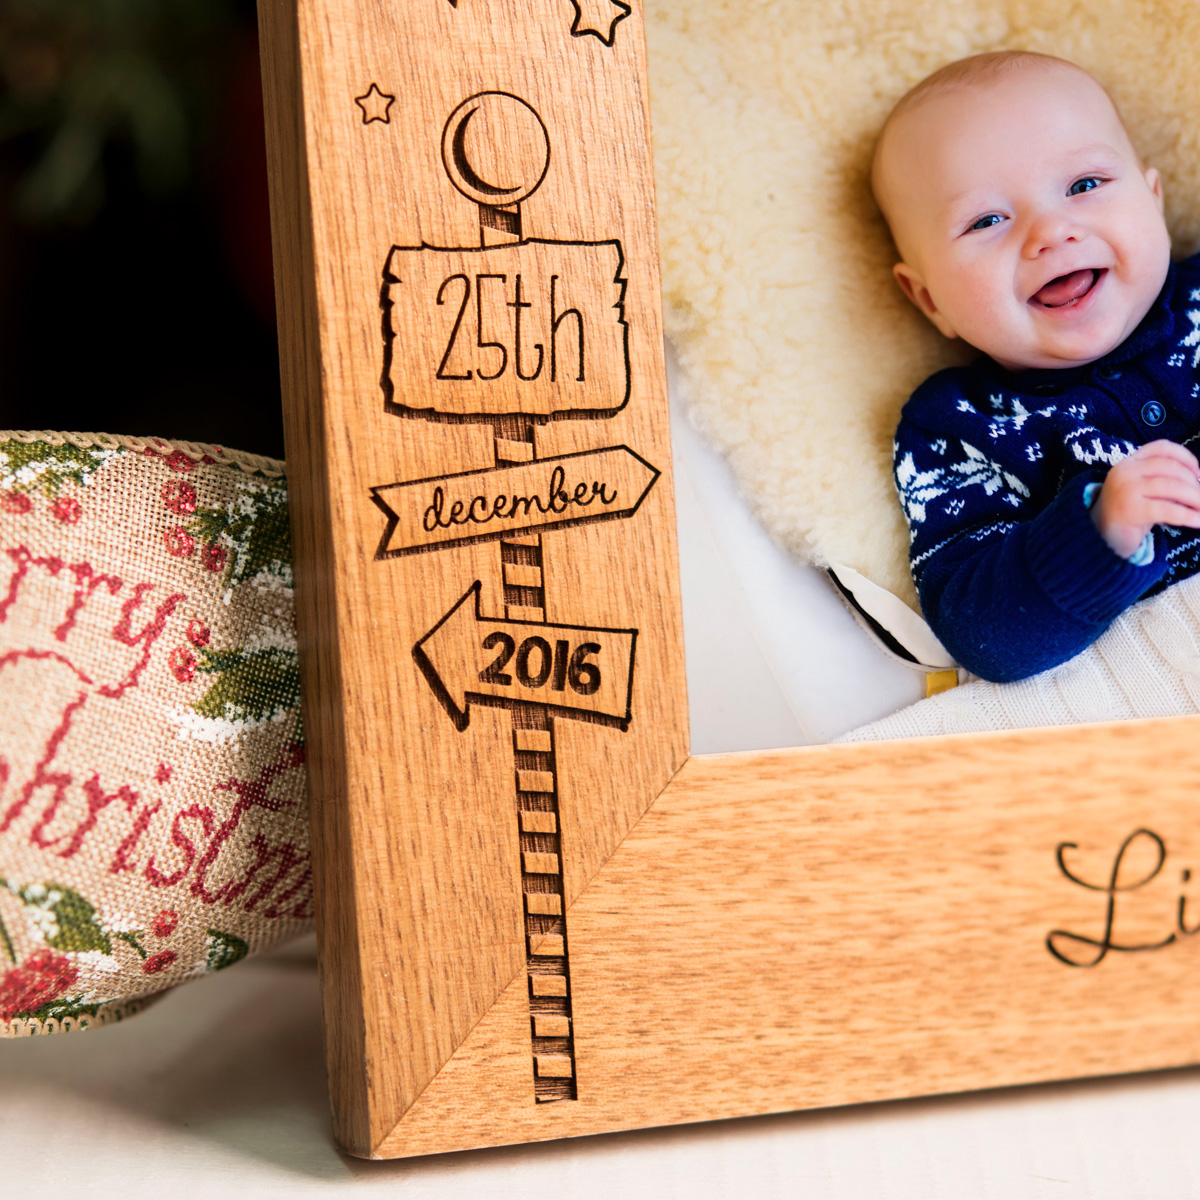 Personalised Engraved Wooden Photo Frame - First Christmas, Signpost